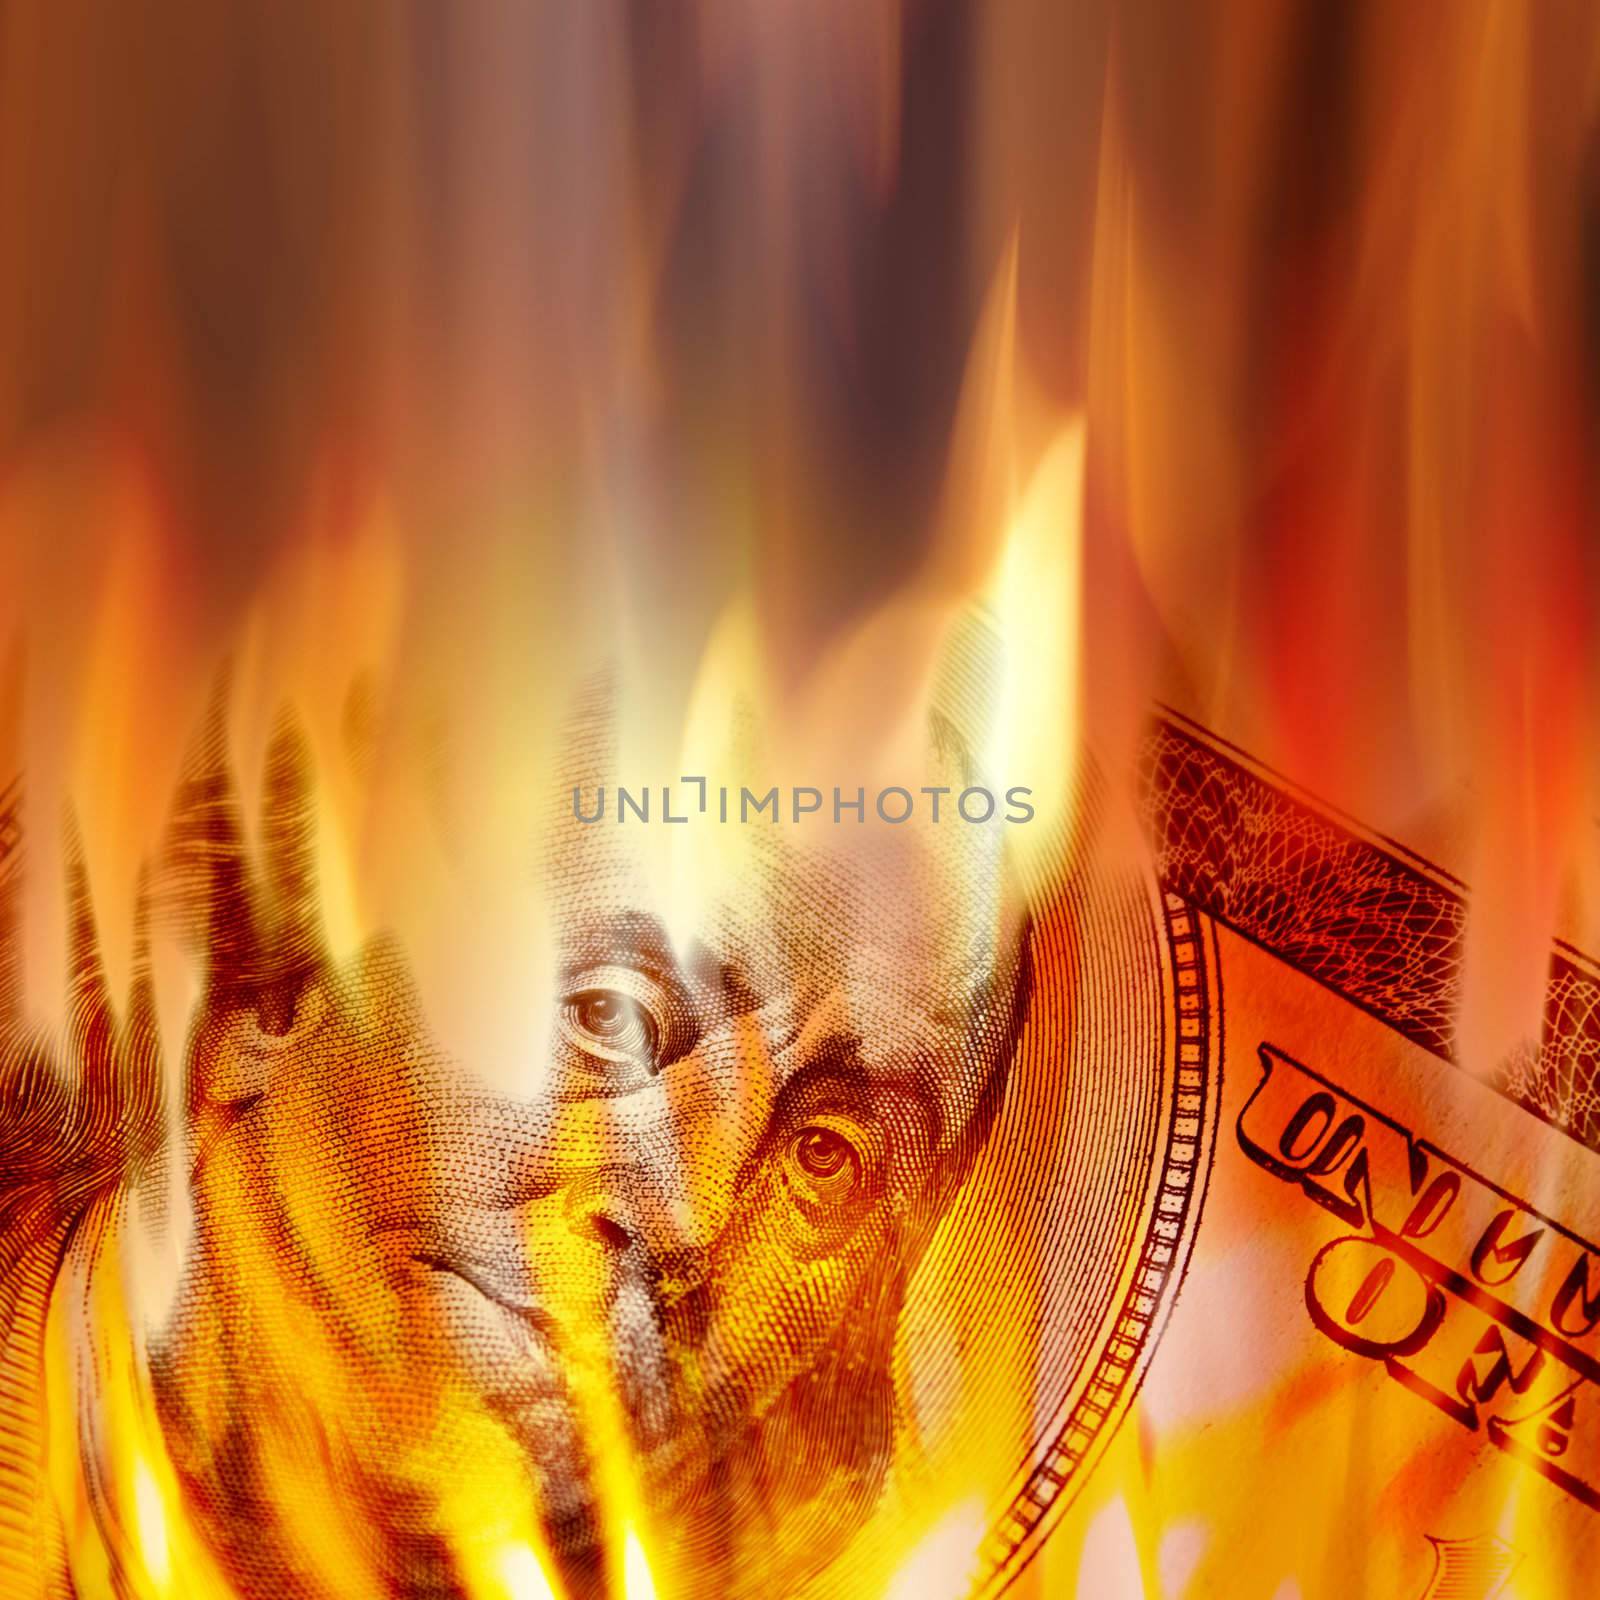 Burning American money with Benjamin Franklins face appearing on fire on a one hundred dollar bill.